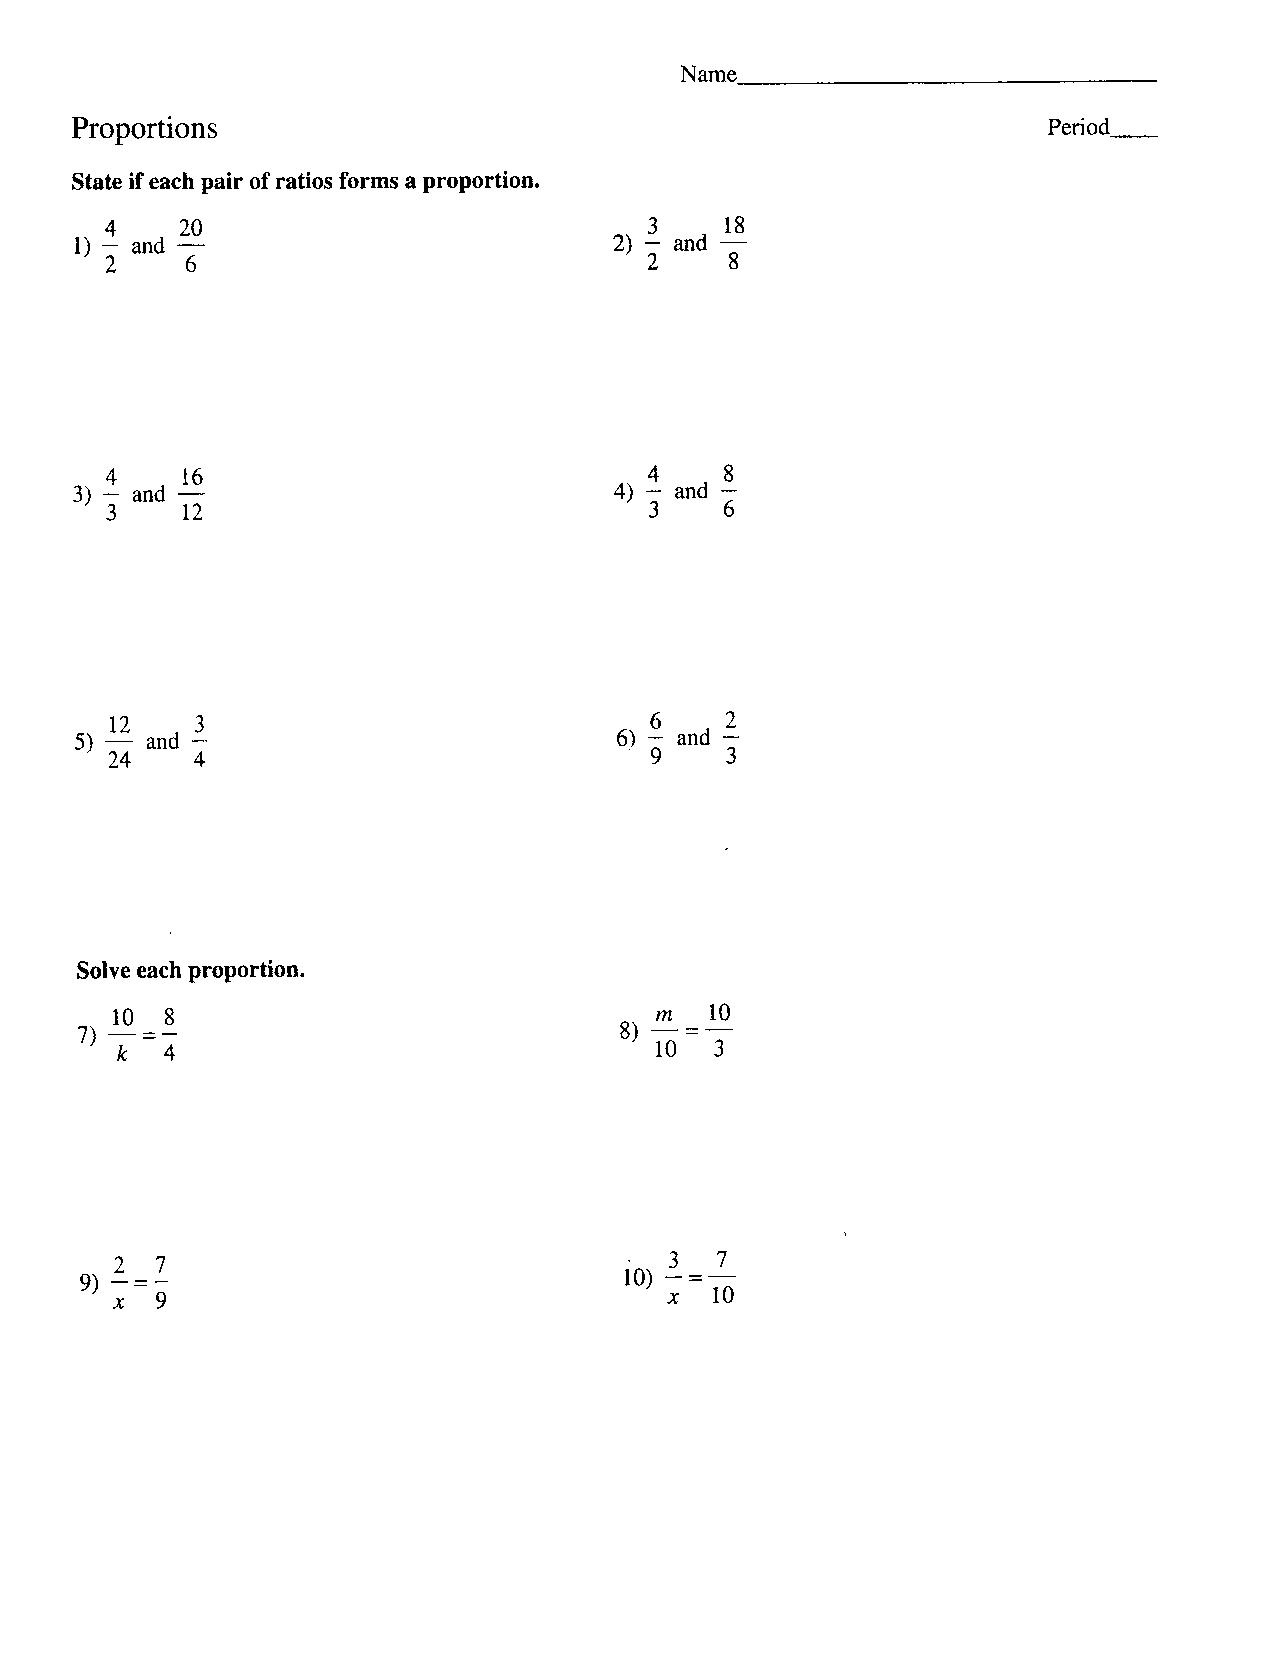 12 Best Images of Solving Proportions Worksheet - Solving Ratios and